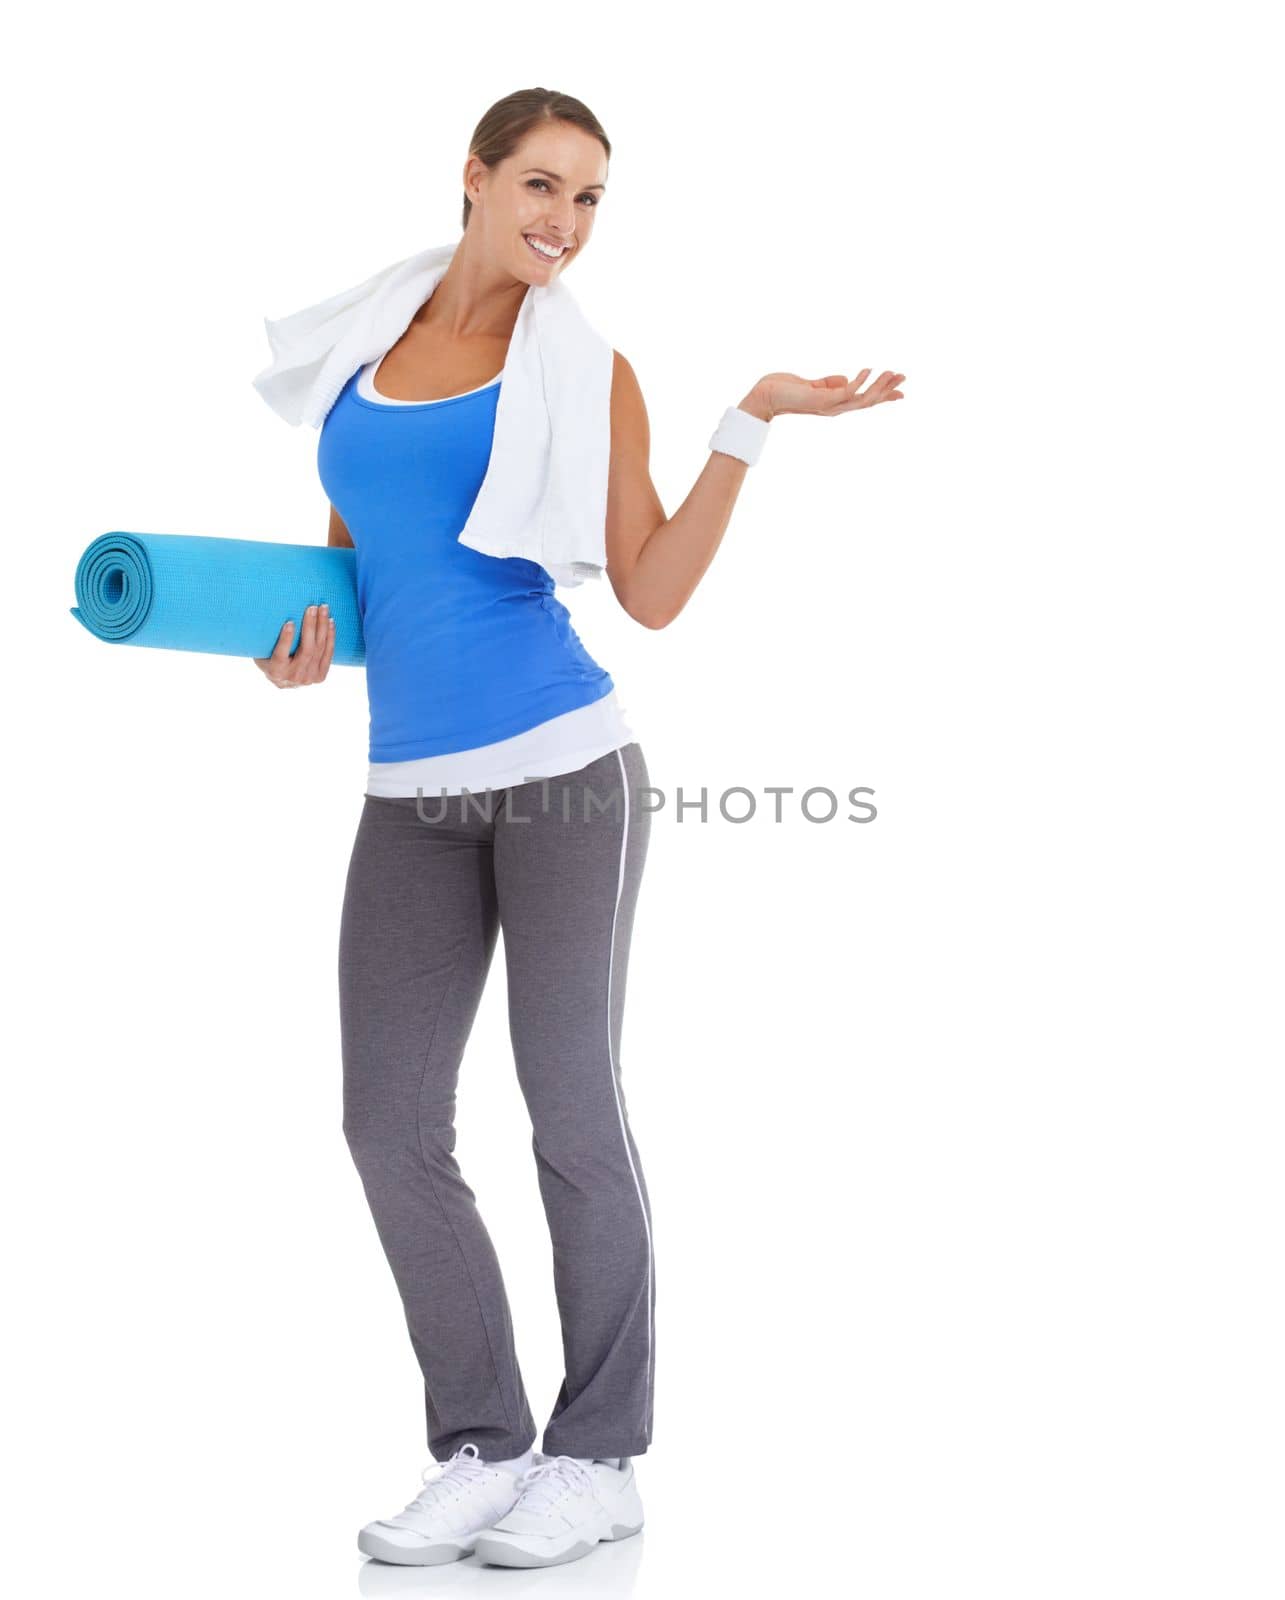 Heres the answer to your fitness needs...Fit young woman holding a pilates mat with a smile - isolated on white